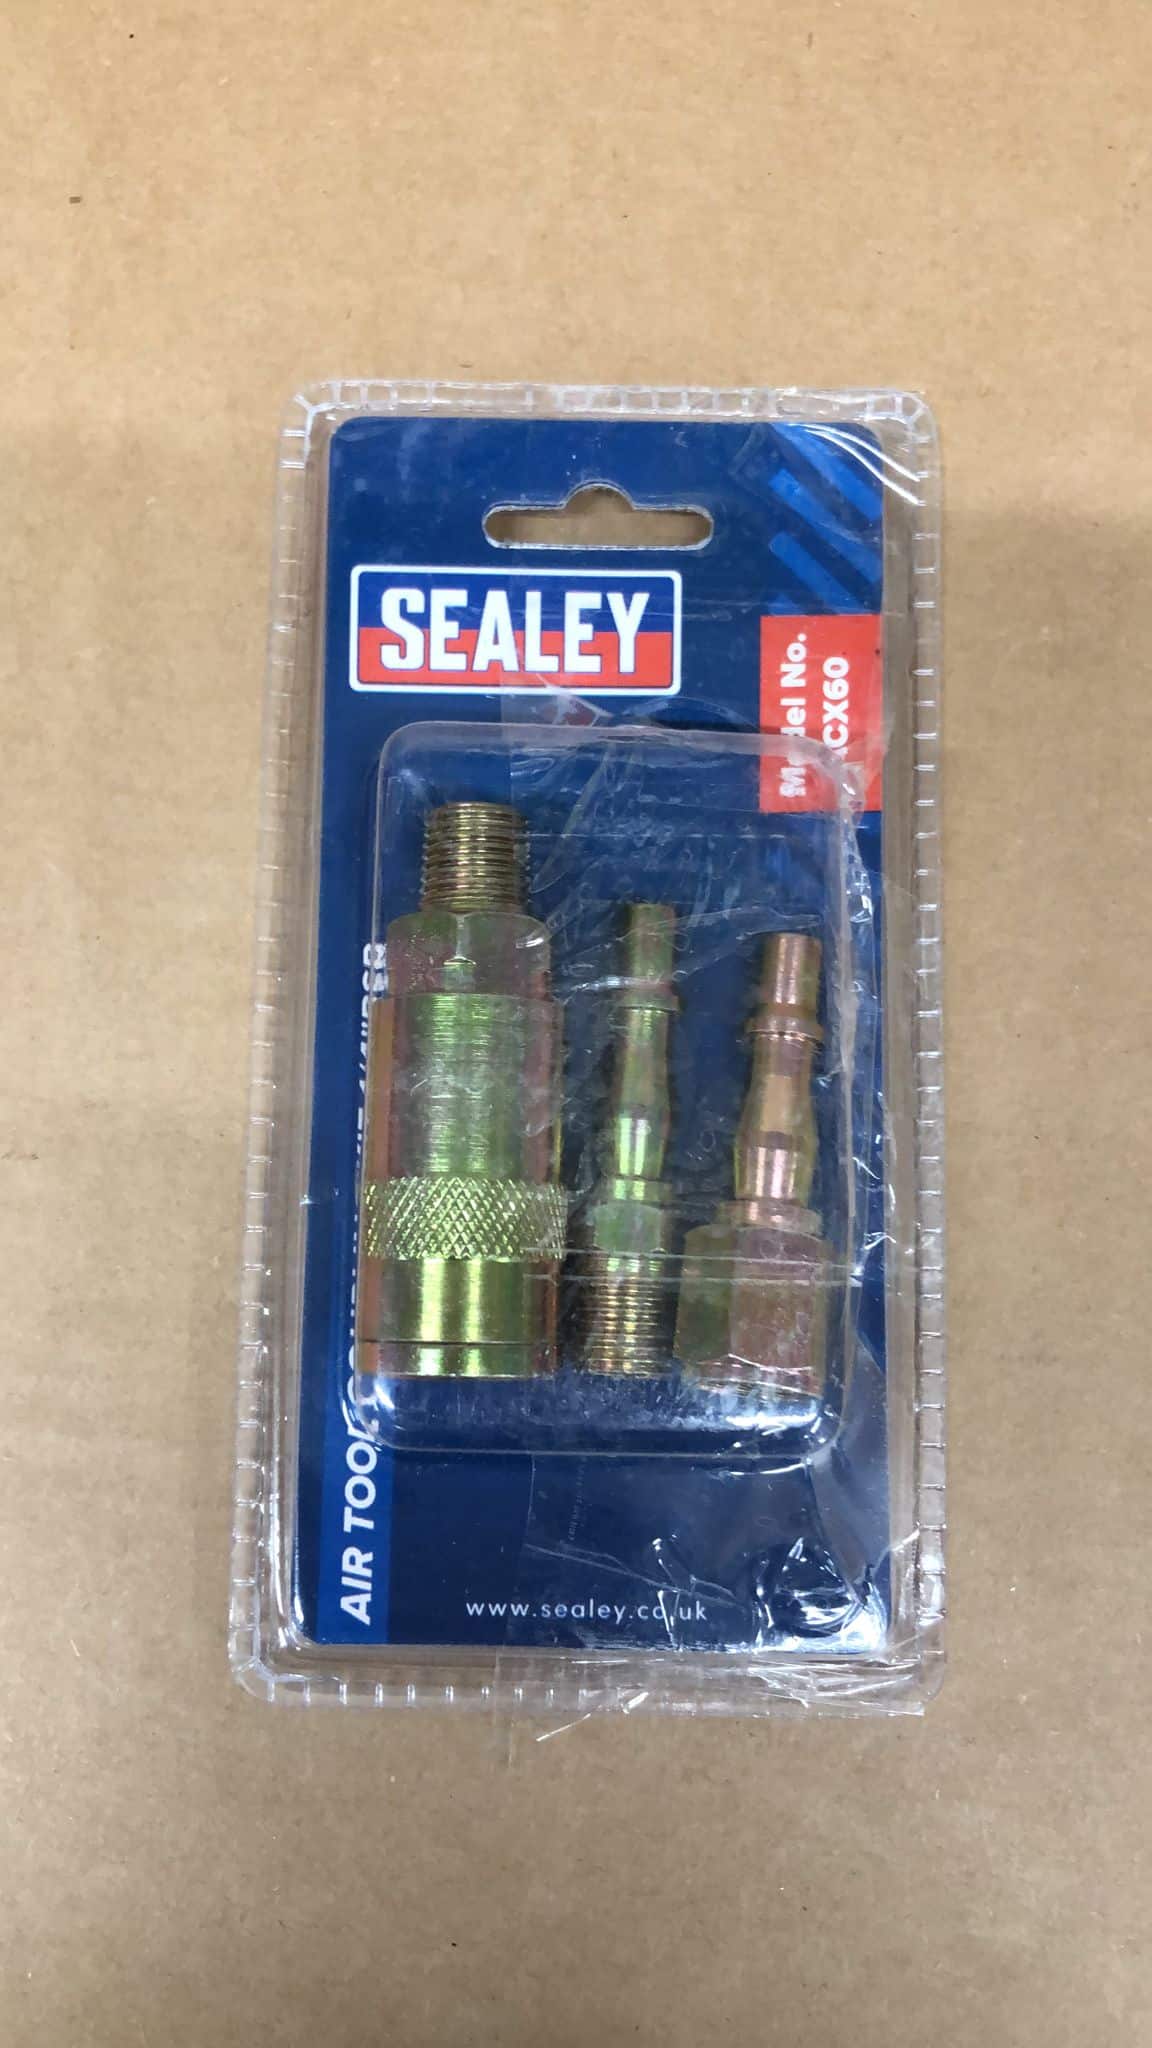 Sealey Air Tool Coupling Kit 1/4 Inch BSP ACX60 6316